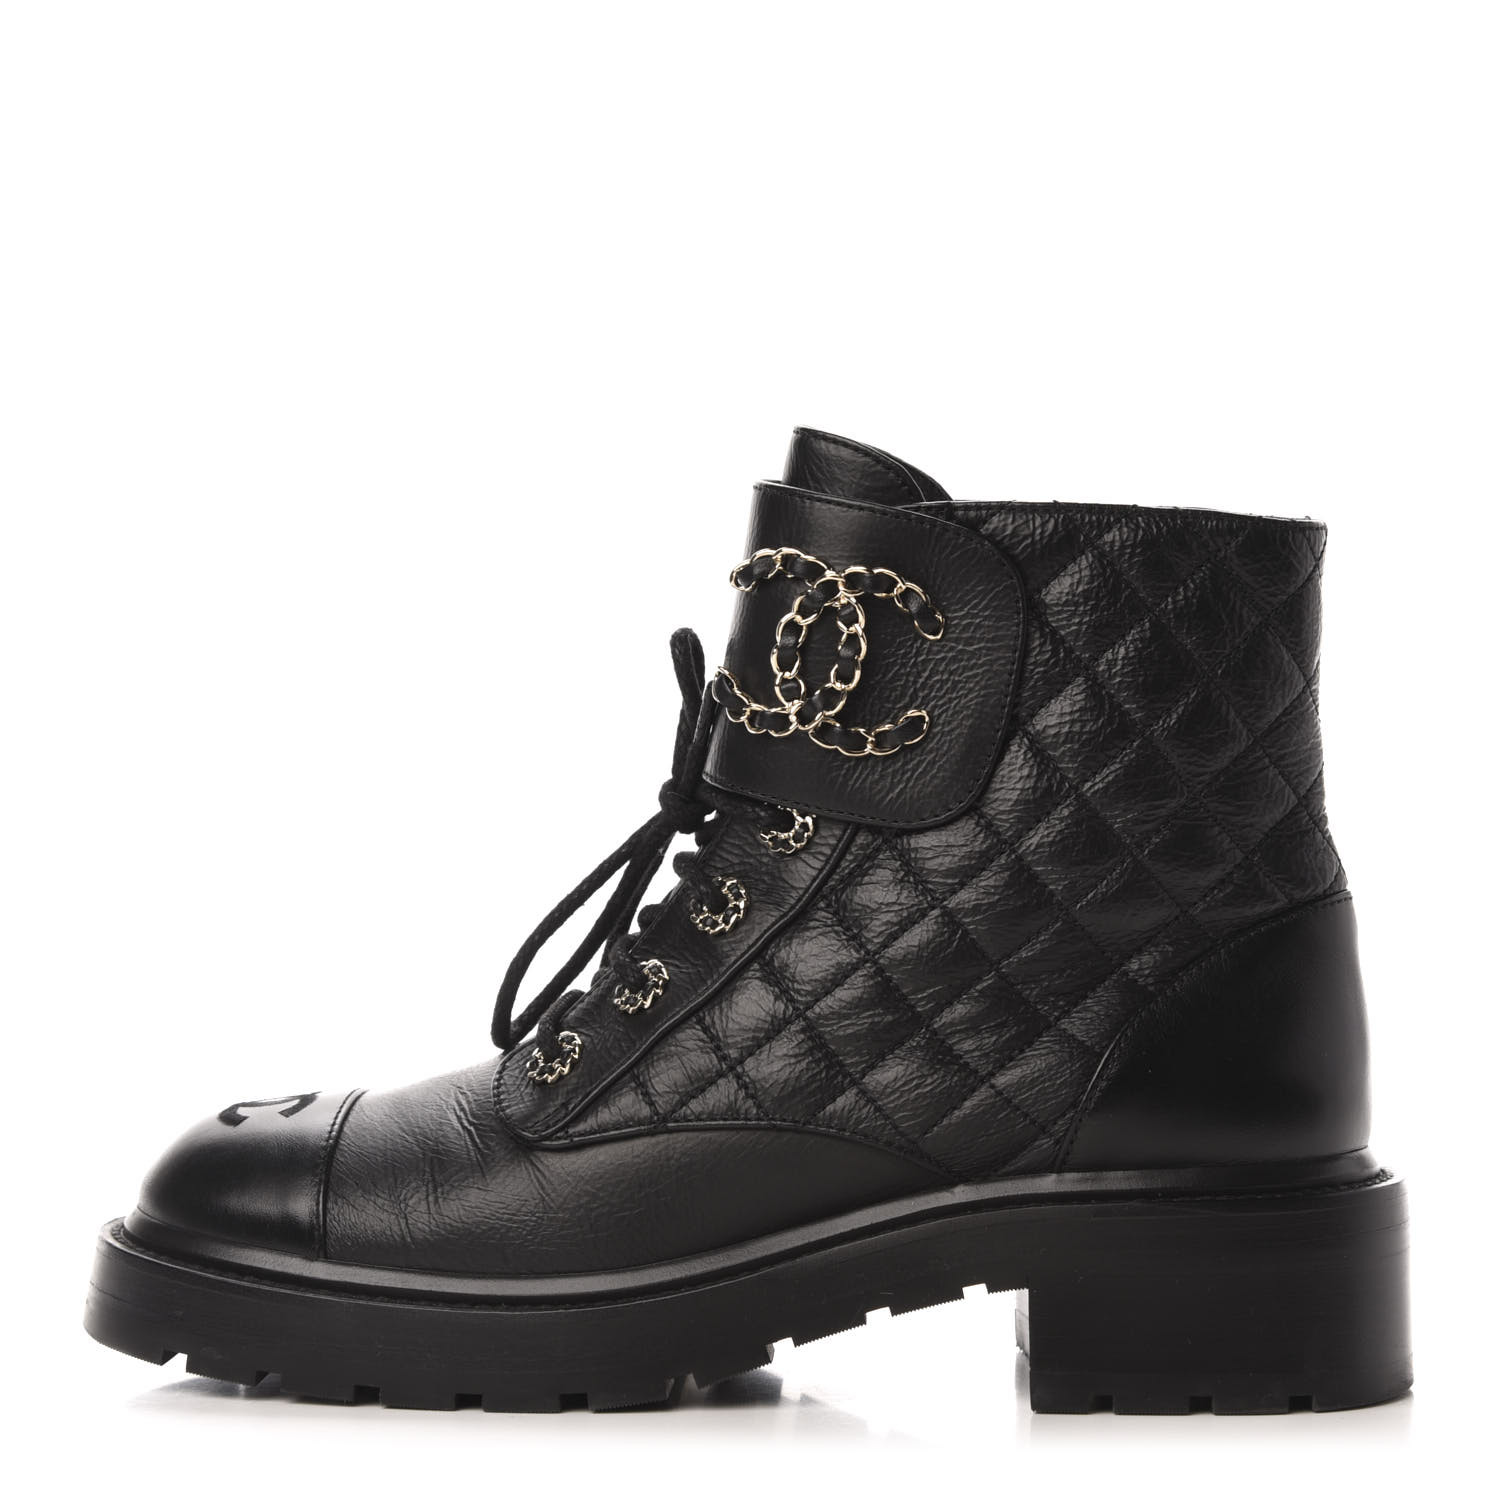 CHANEL Shiny Goatskin Calfskin Quilted Lace Up Combat Boots 39 Black ...